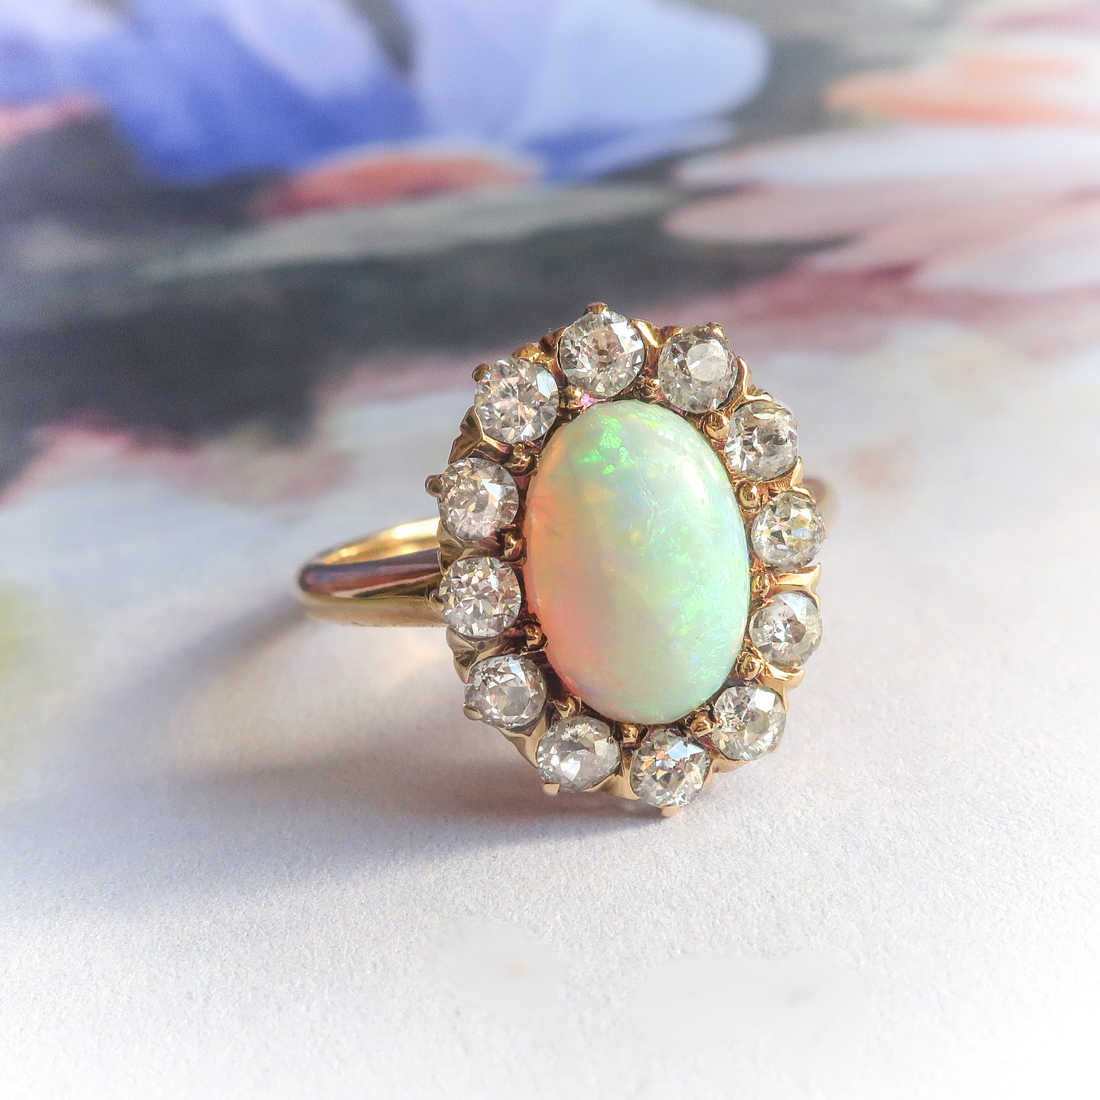 Antique Opal Diamond Ring 1900's Vintage 1.93ct t.w. Natural Opal Old ...